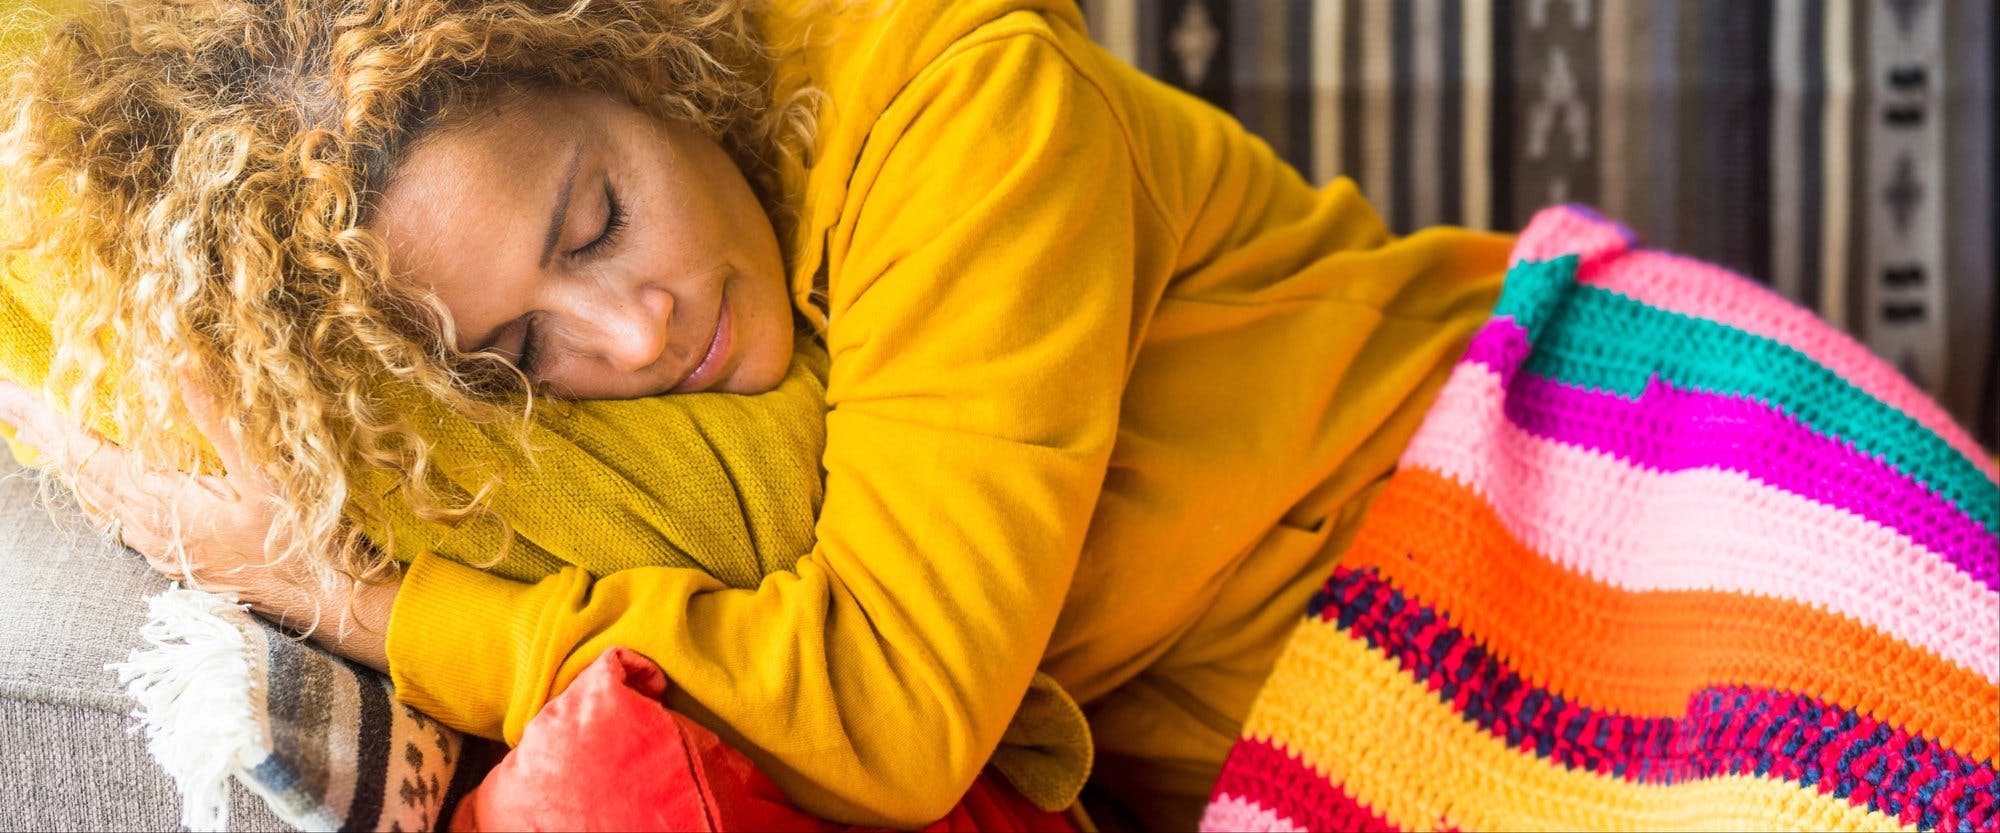 Excessive Sleeping During the Day: Is it a Sleep Disorder?